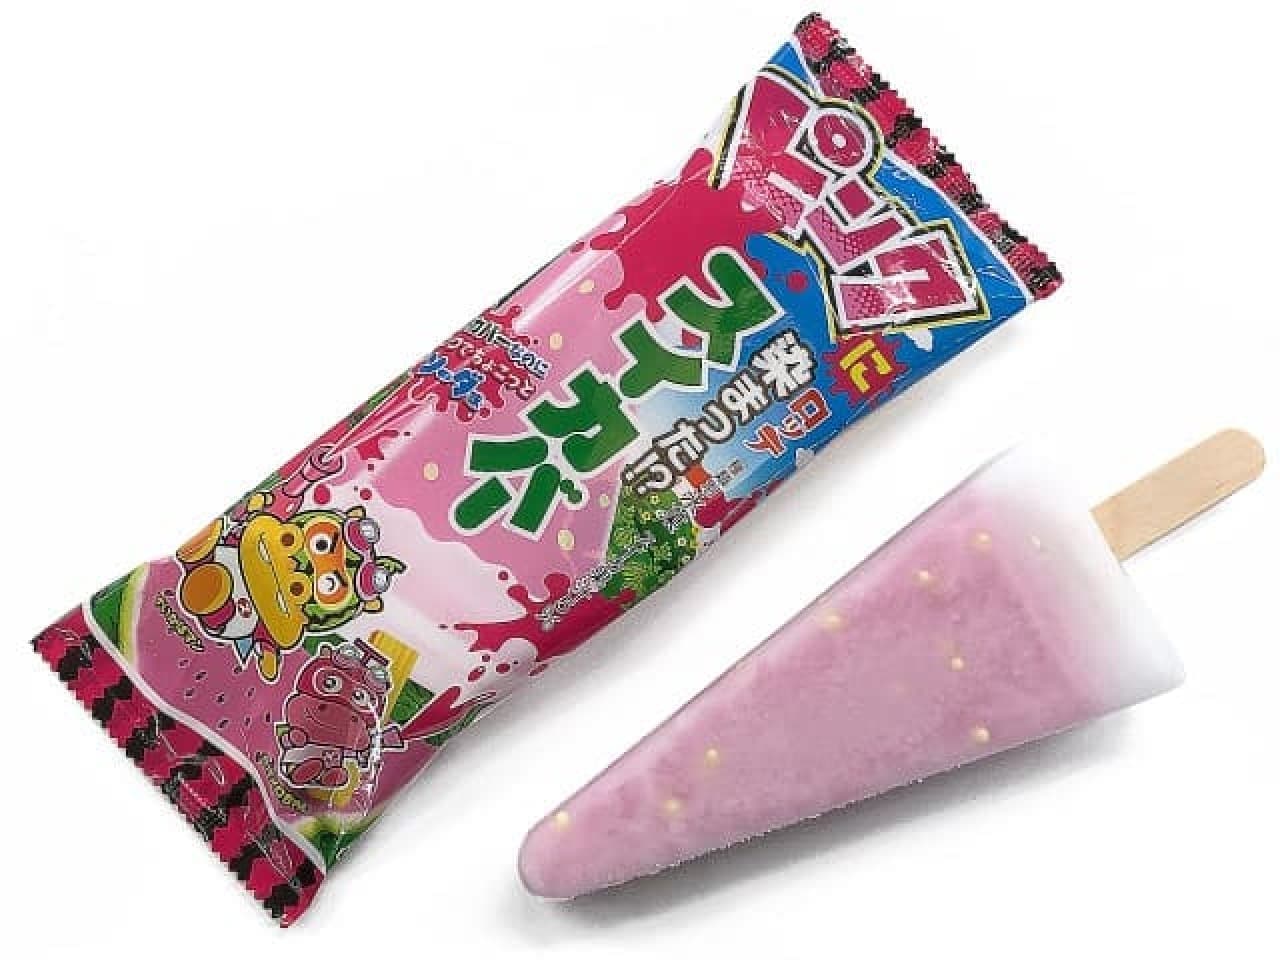 7-ELEVEN "Lotte Pink-tinted Suicover